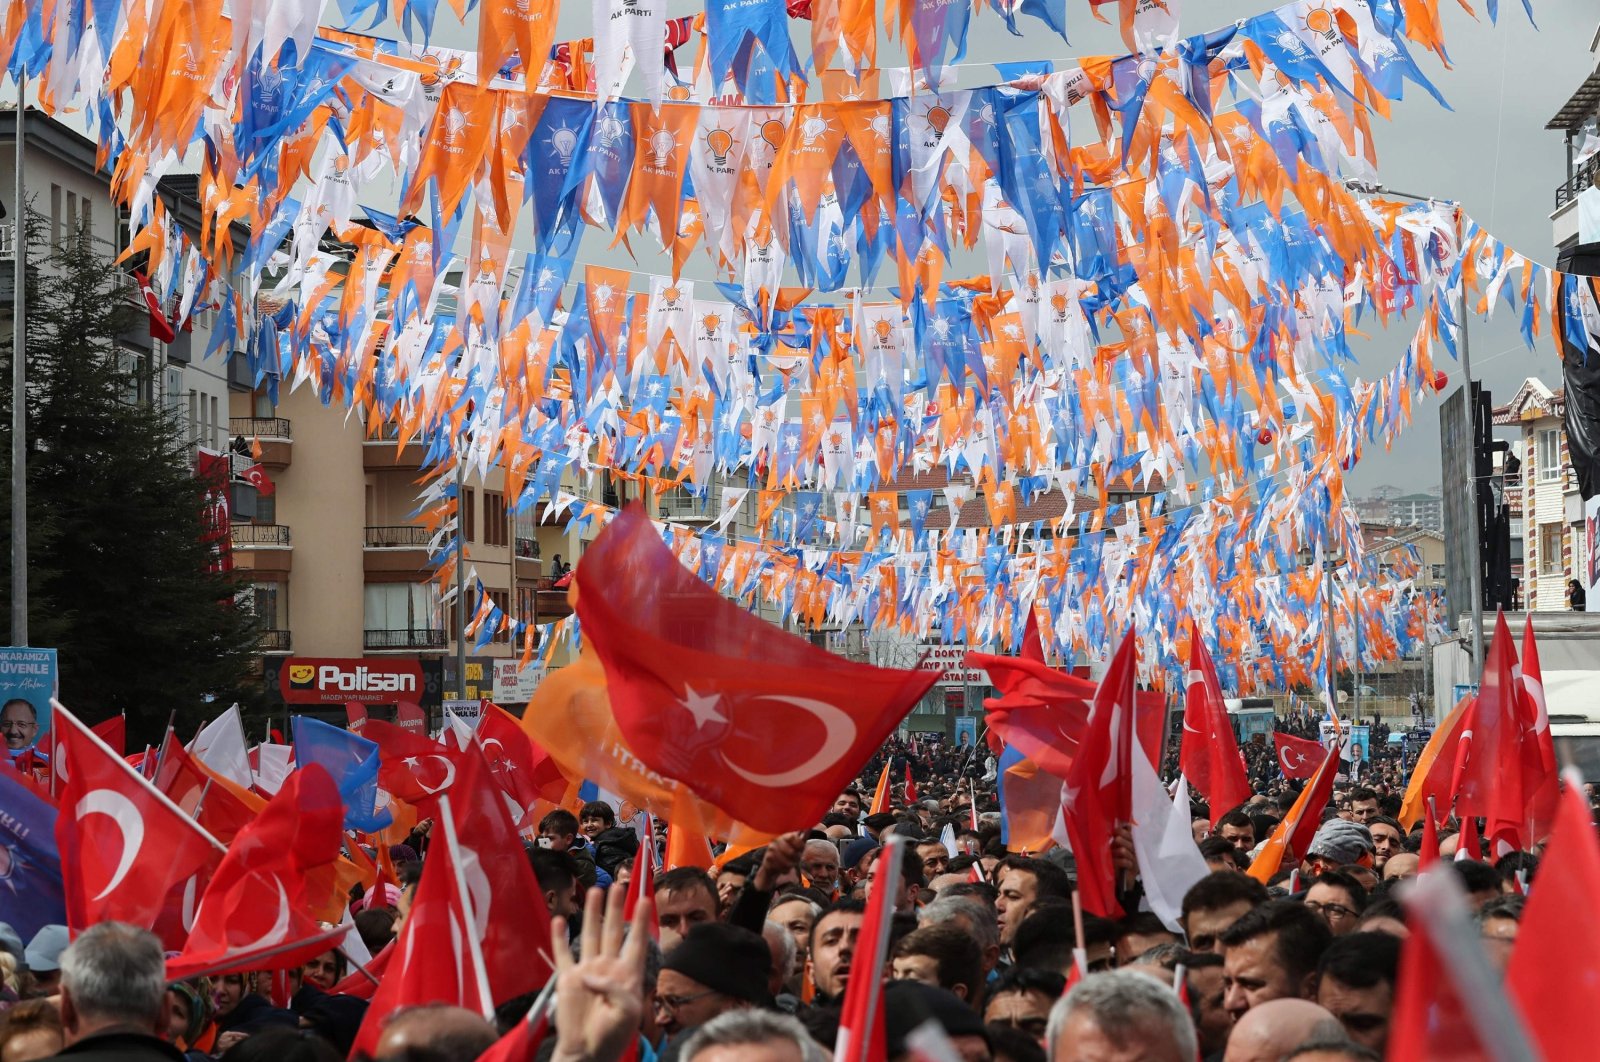 People wave flags as they gather to listen to President Recep Tayyip Erdoğan, the ruling Justice and Development Party's (AK Party) leader, during a party campaign rally in Ankara, Turkey, March 13, 2019. (AFP Photo)